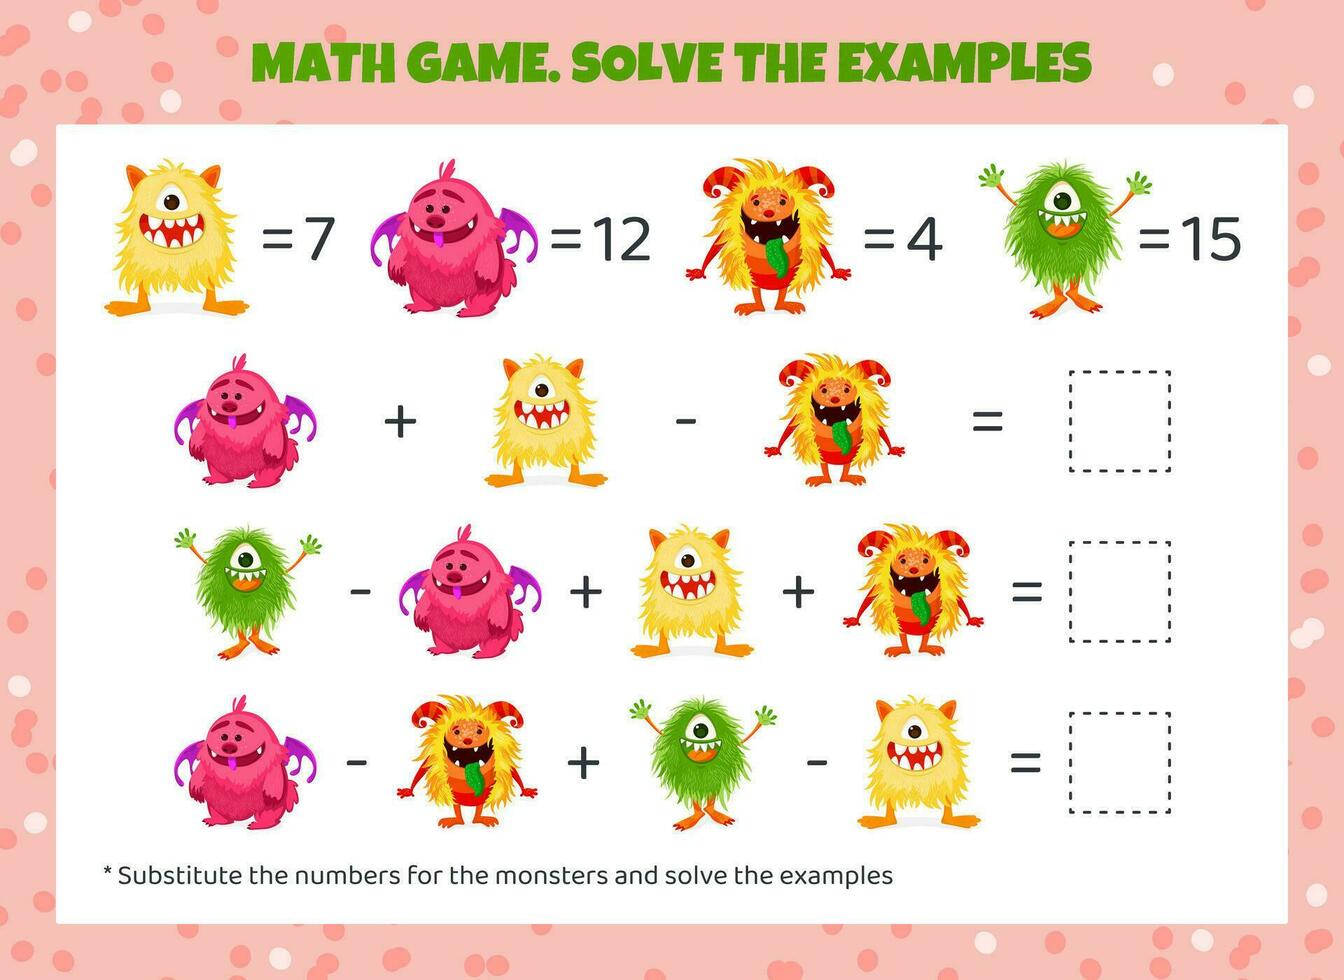 Math game for kids. Replace the monsters with numbers and solve the examples. Mathematical Worksheet for preschool children. Addition and subtraction. Vector illustration. Cartoon fluffy monsters.